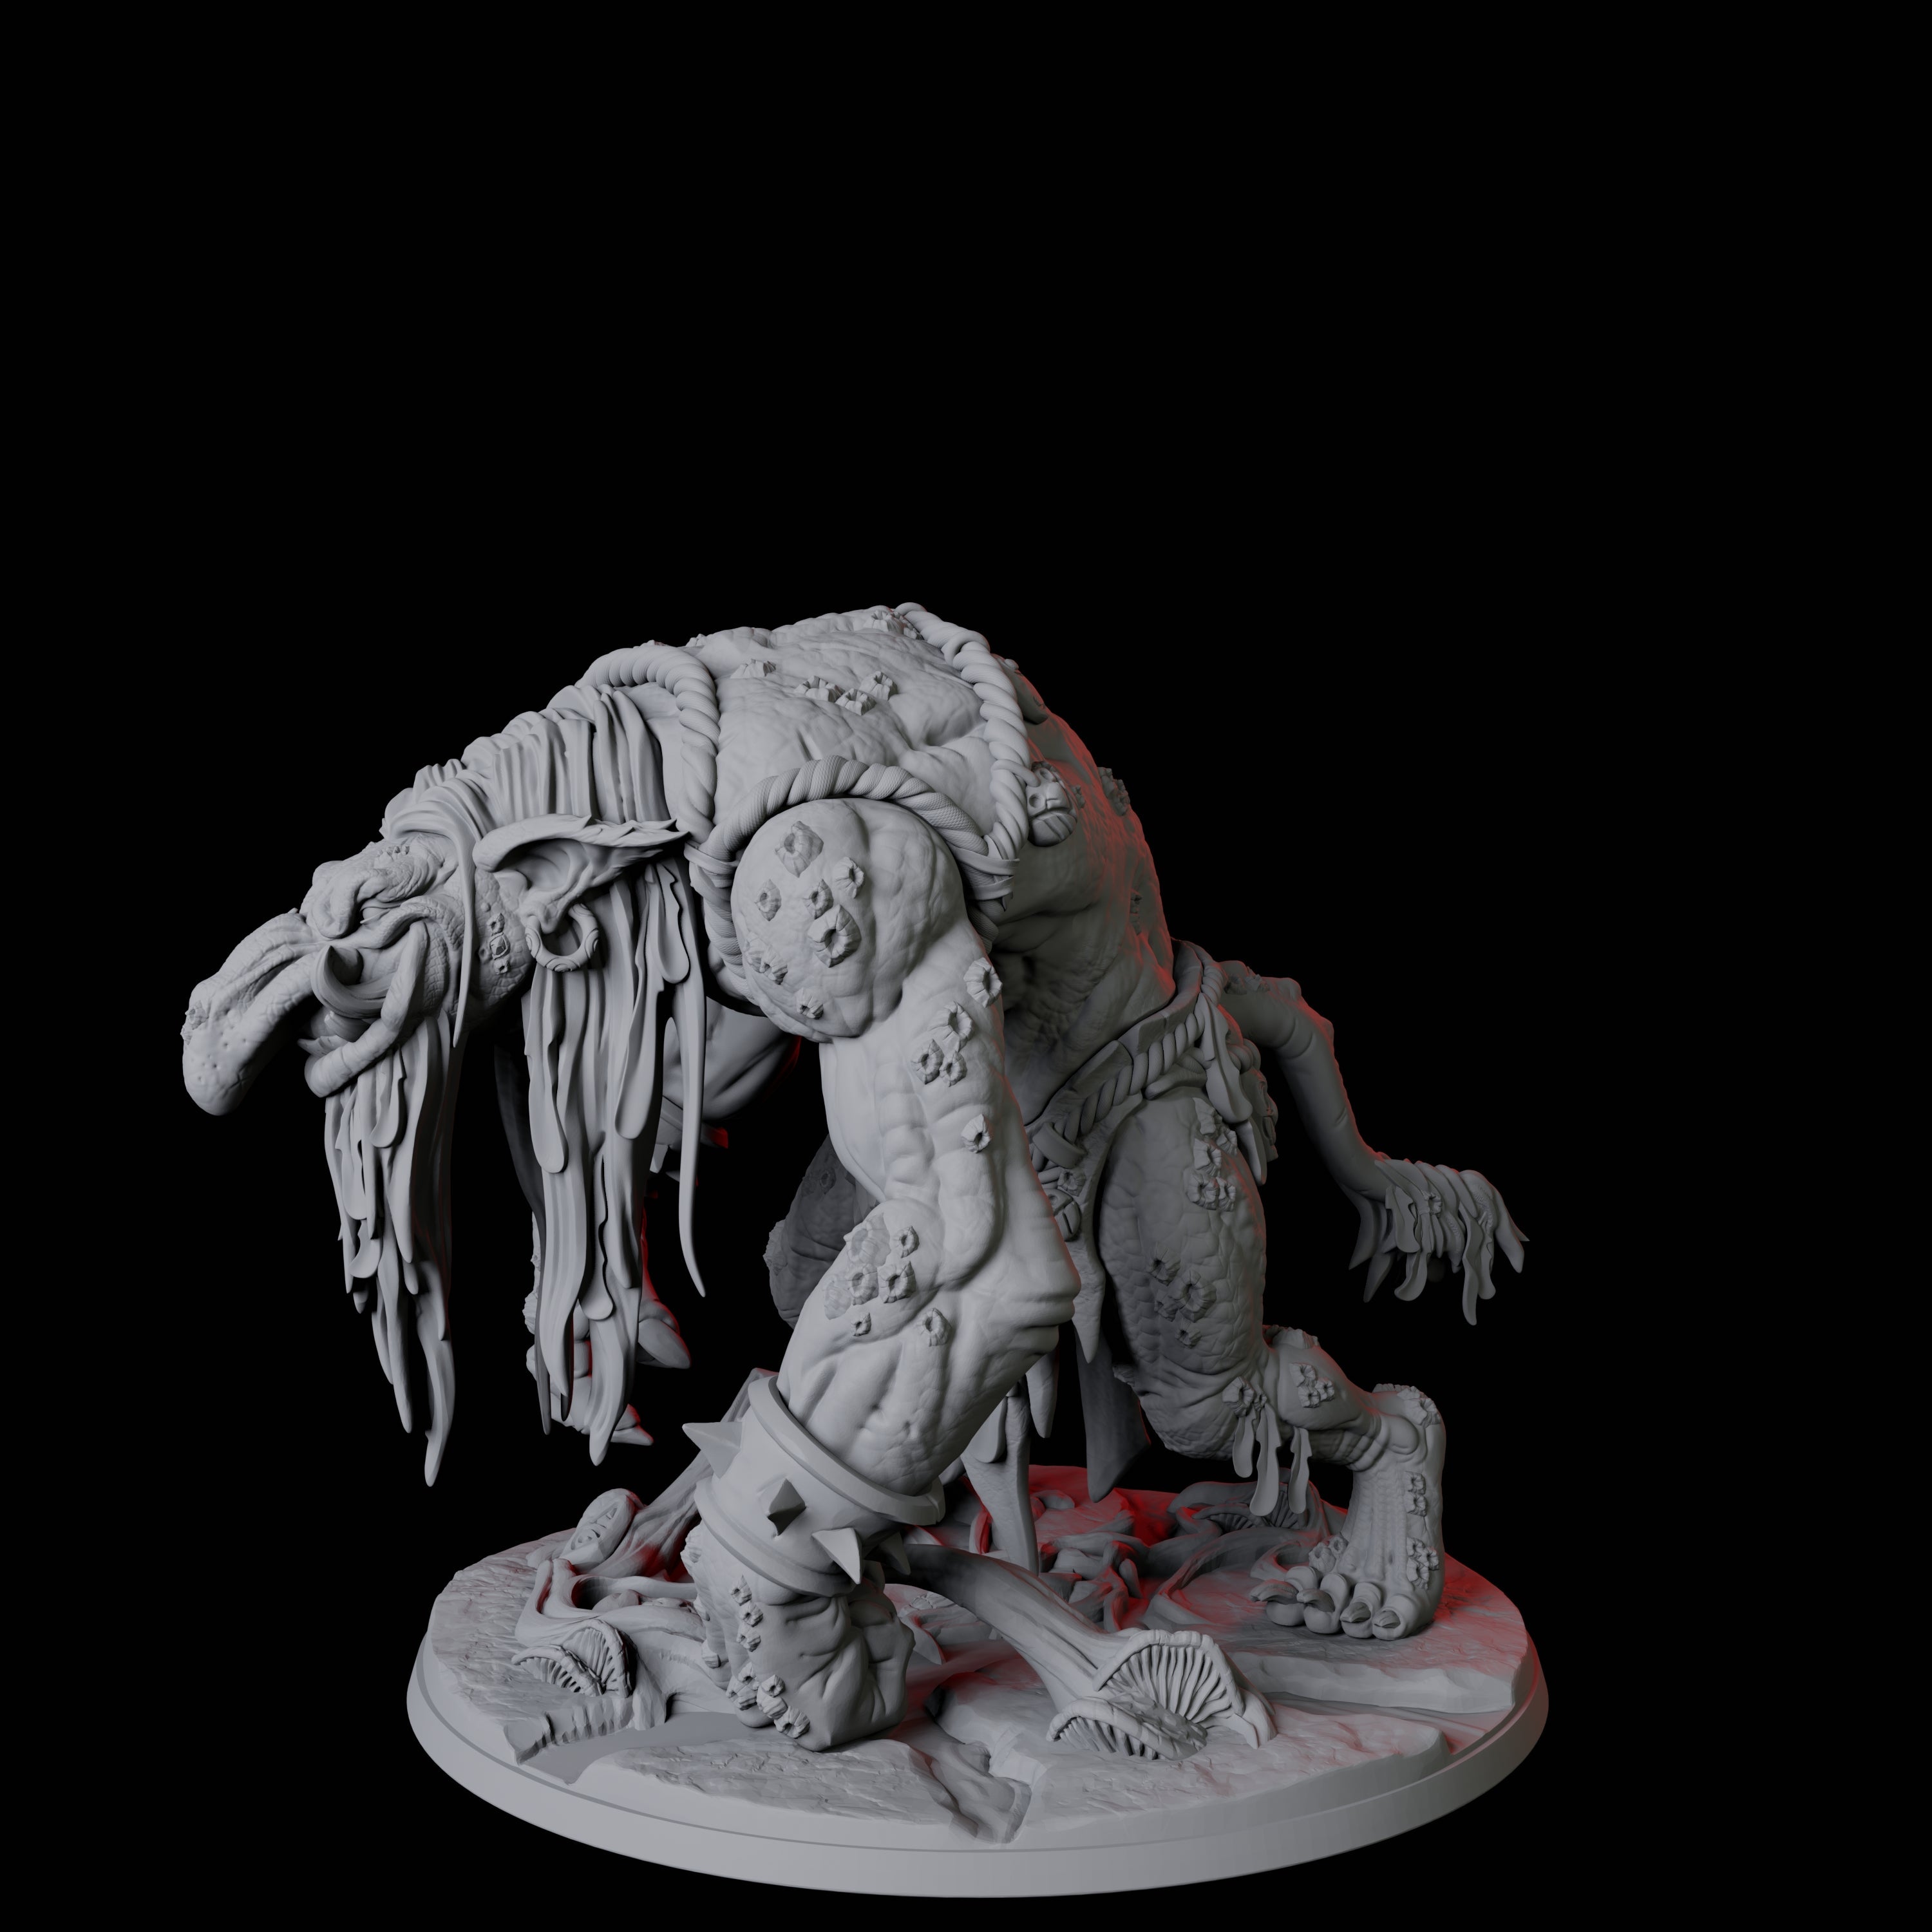 Swamp Troll Miniature for Dungeons and Dragons, Pathfinder or other TTRPGs